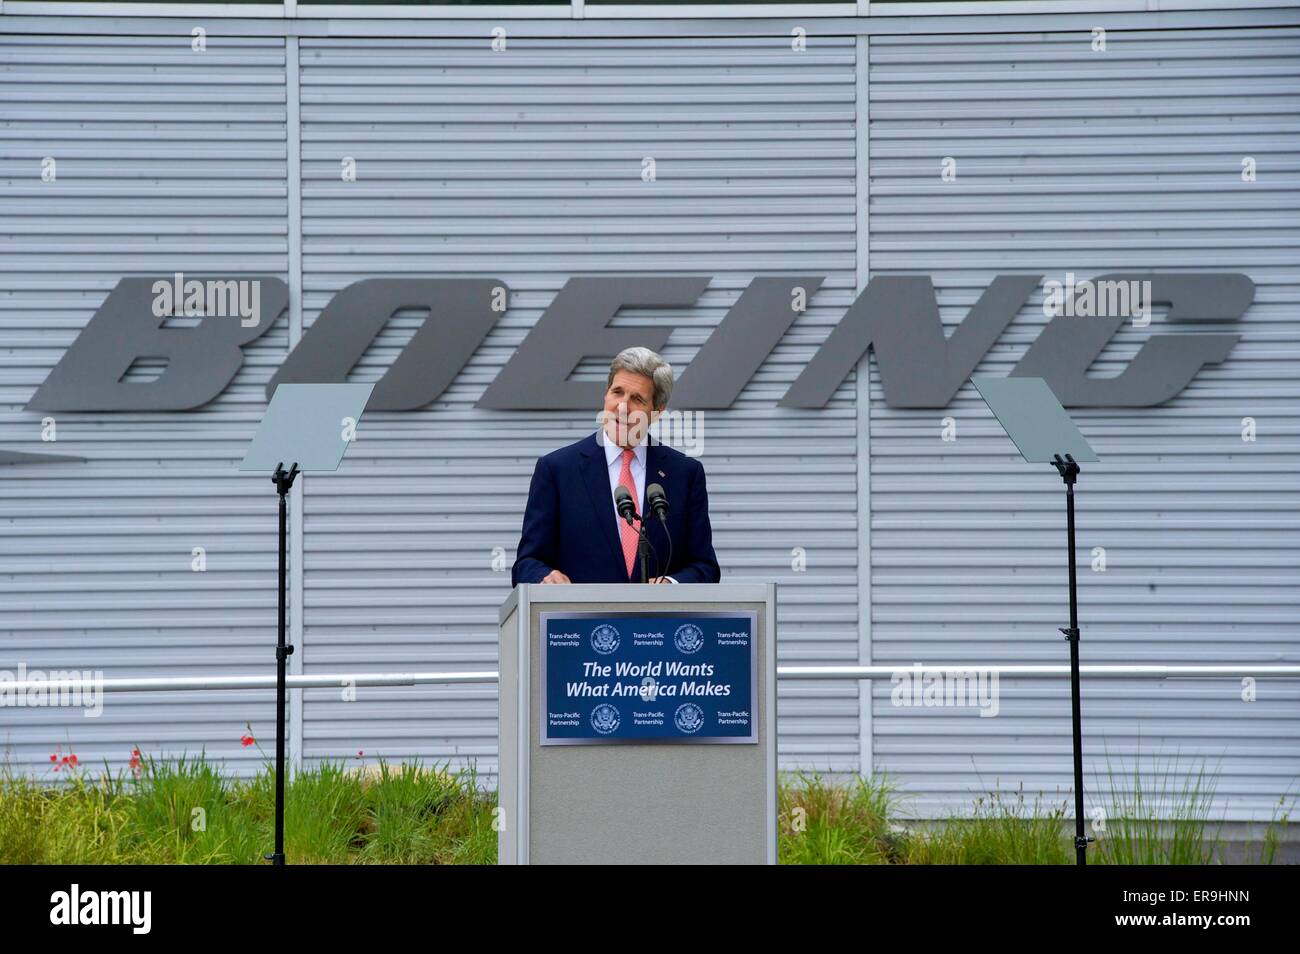 US Secretary of State John Kerry gives an address on U.S. and Pacific regional trade policy at the Boeing Company 737 Airplane Factory May 19, 2015 in Renton, Washington. Stock Photo